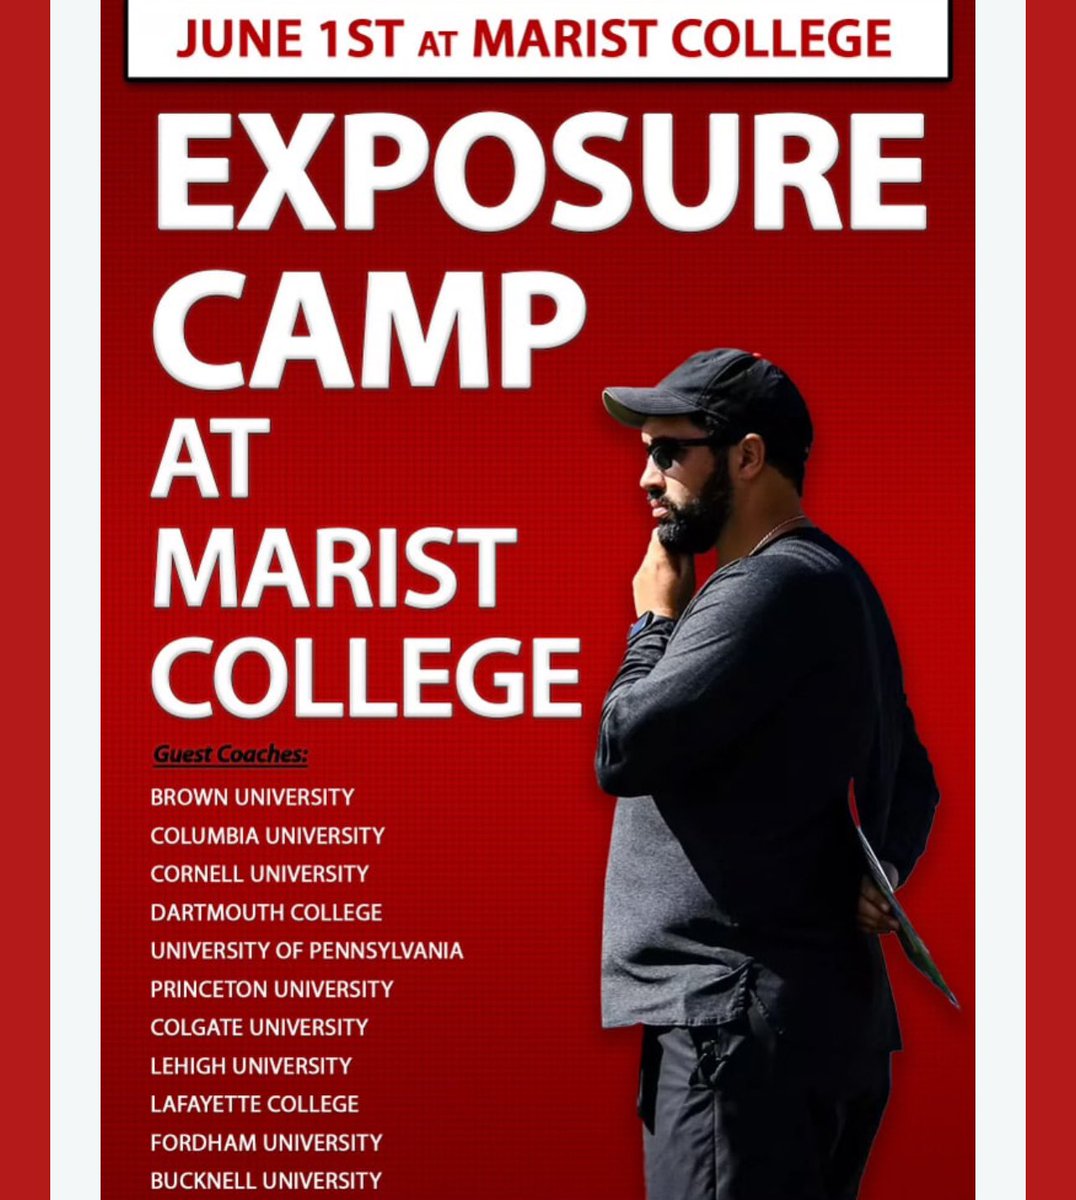 I will be attending the Marist Exposure Camp on June 1st. Thank you @CoachMWillis for the invite. Look forward to working hard on the field! 💪🏽🦍 @TheCoachHo @ZCA_FB4 @AthleticsZca @Coach__spence11 @PascoCountyFB @larryblustein @JoeMento